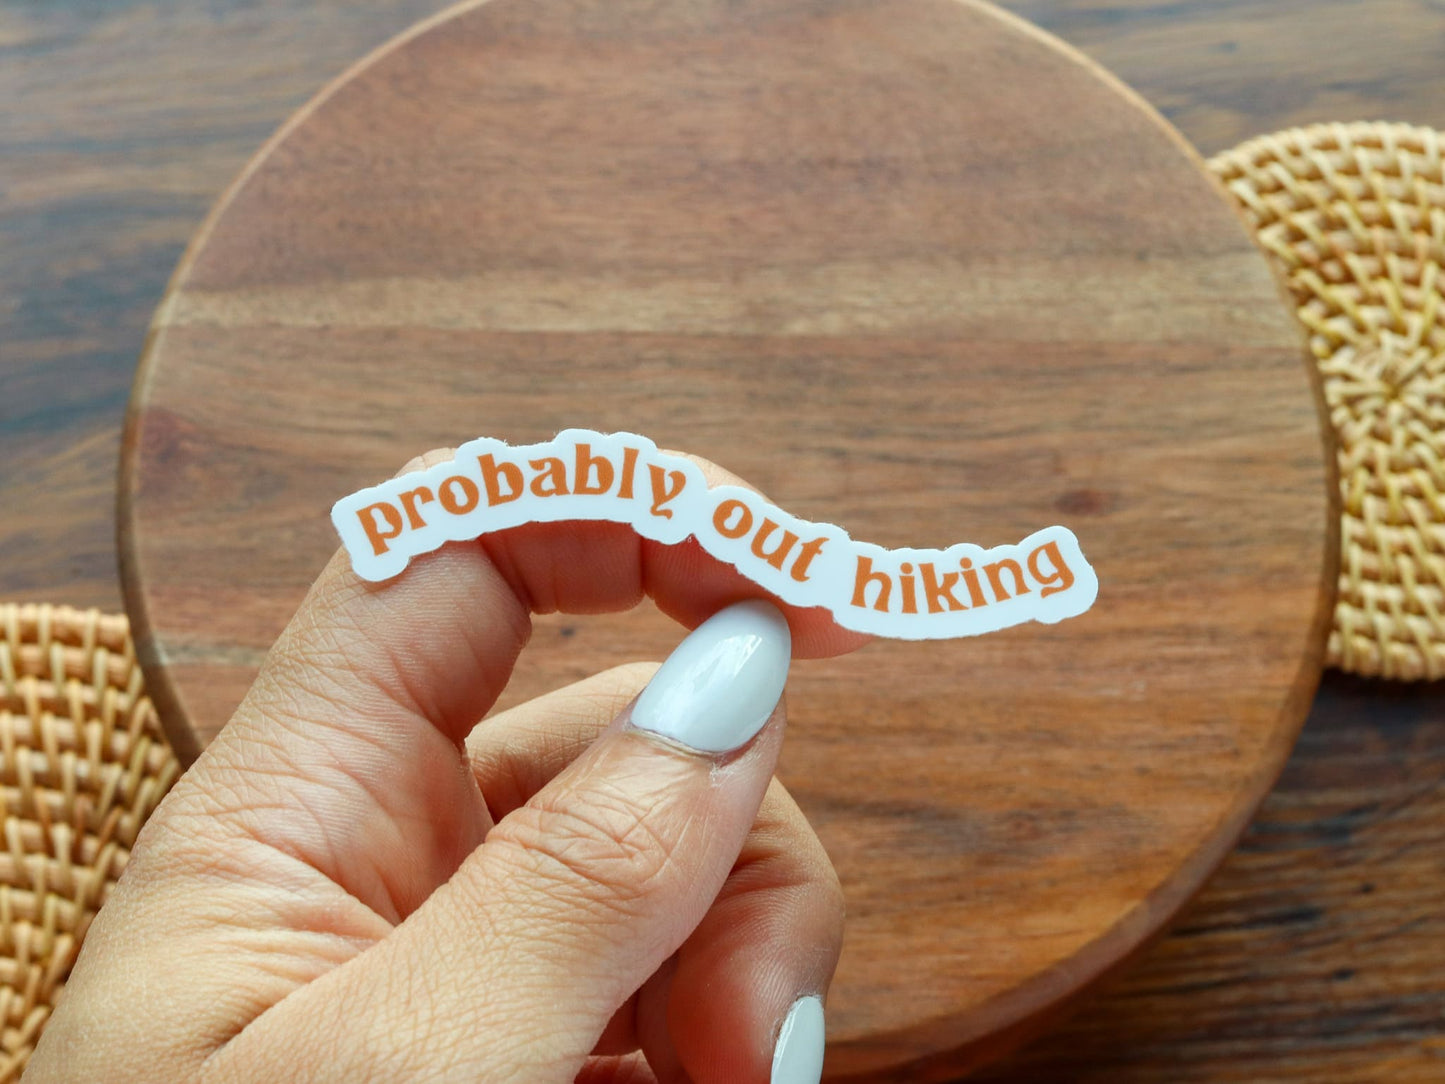 Probably Out Hiking mini sticker